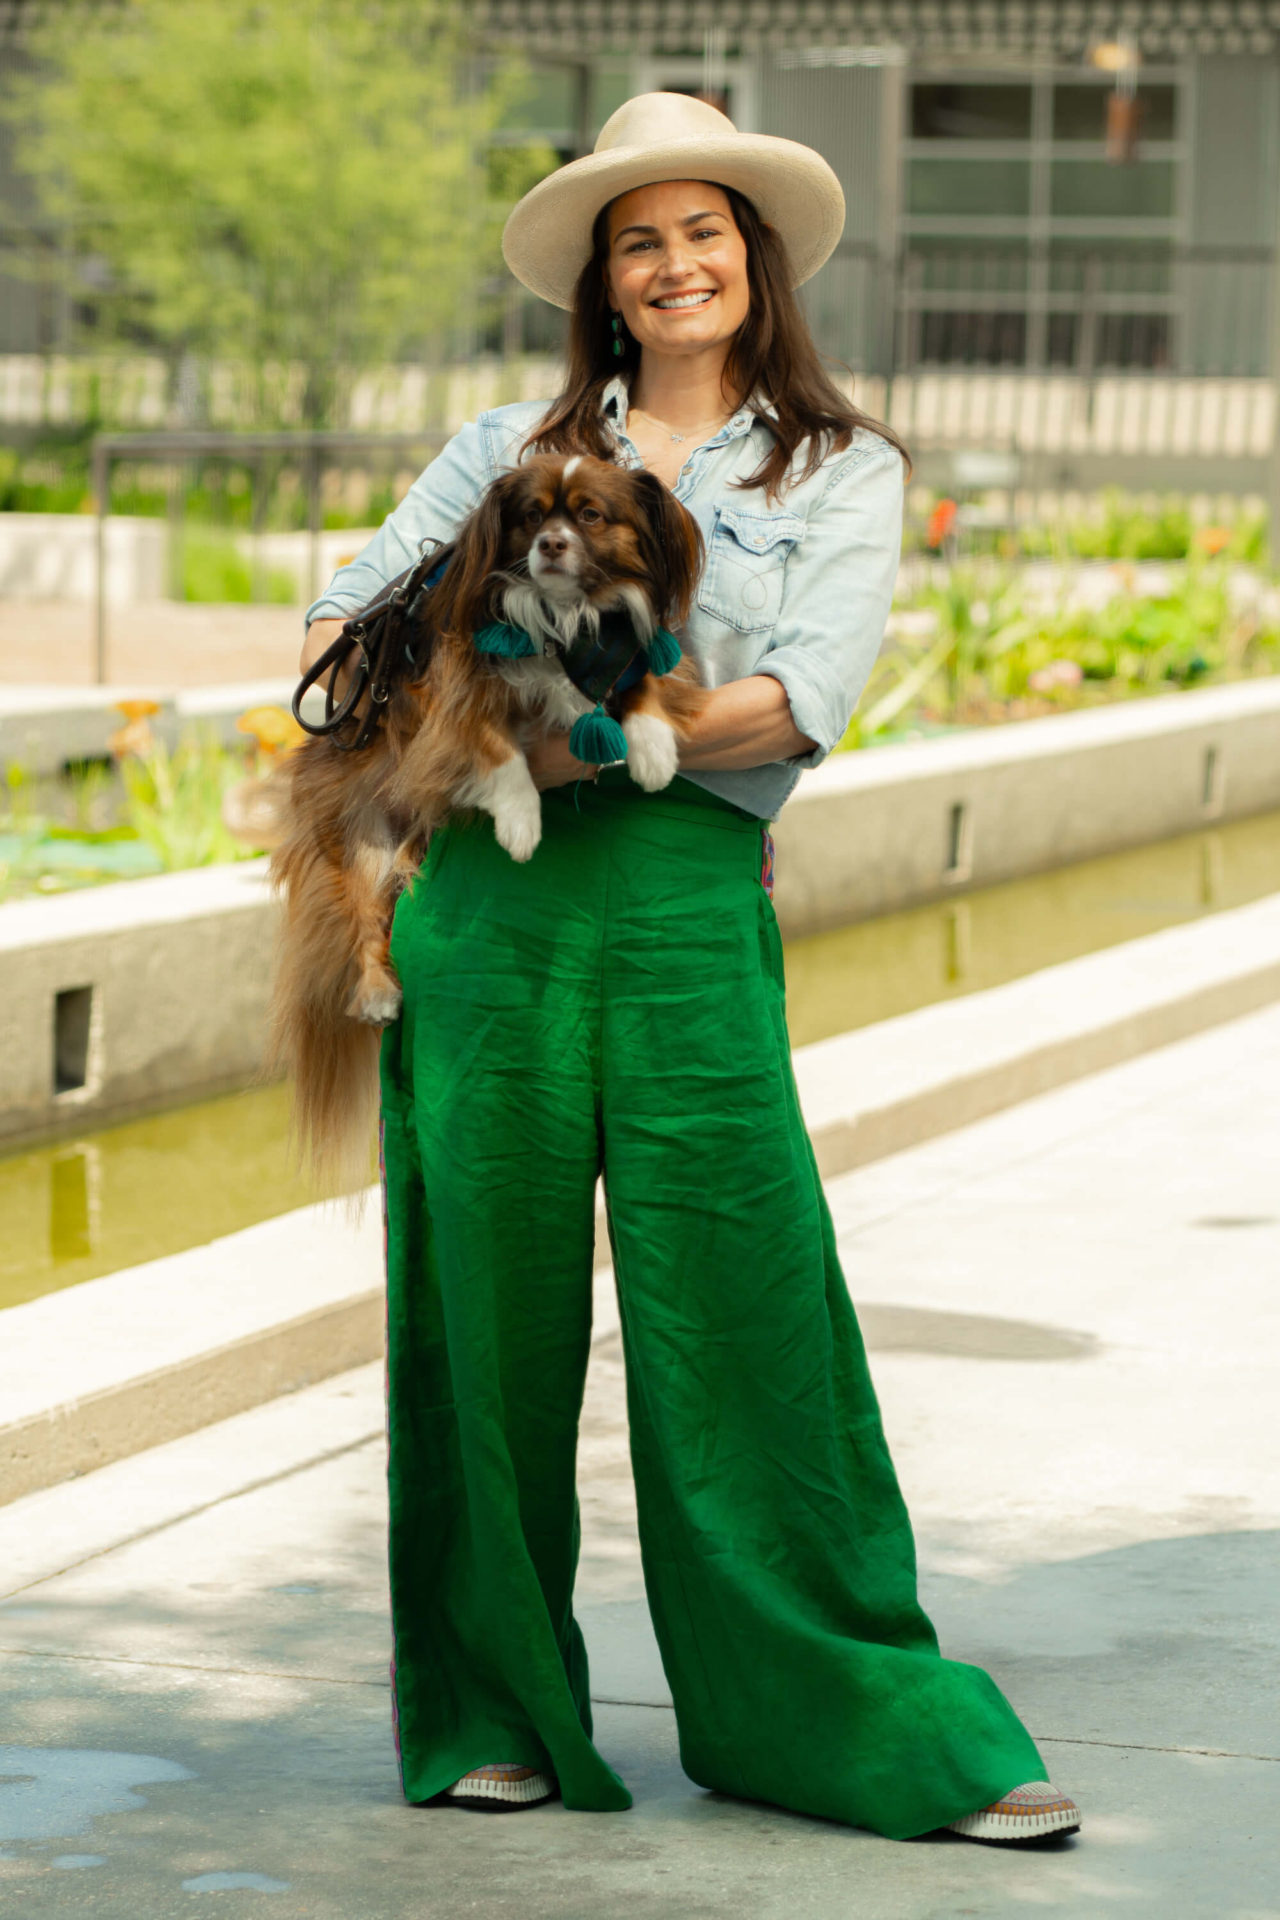 woman with green pants, denim shirt, and cream colored hat standing up and holding chihuahua pekingese dog in front of fountain